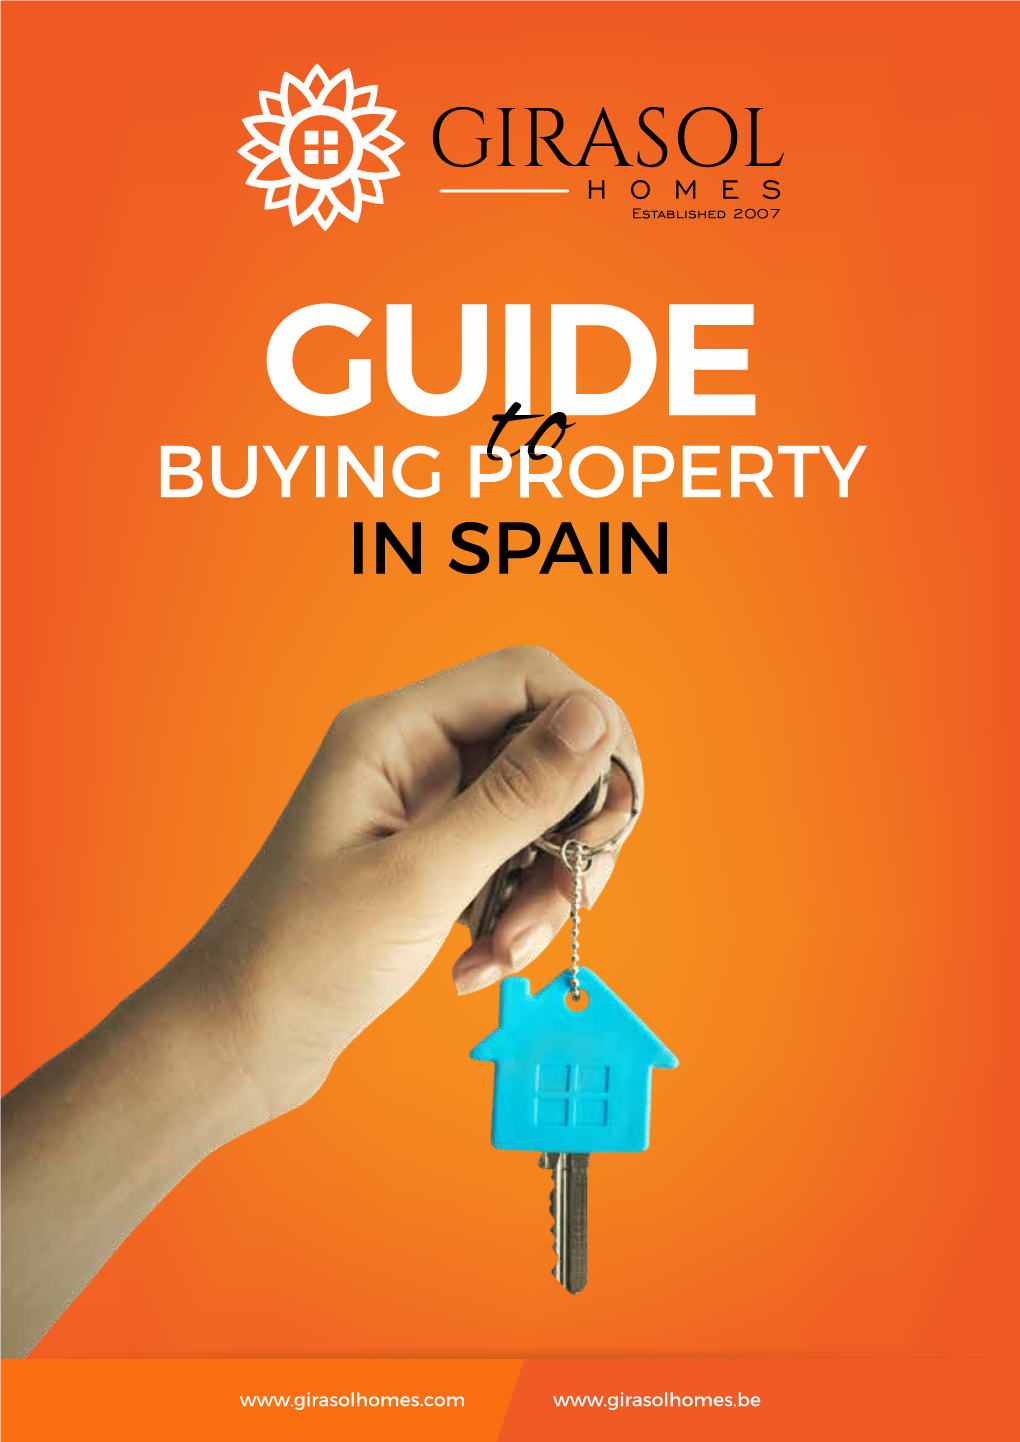 In Spain Buying Property